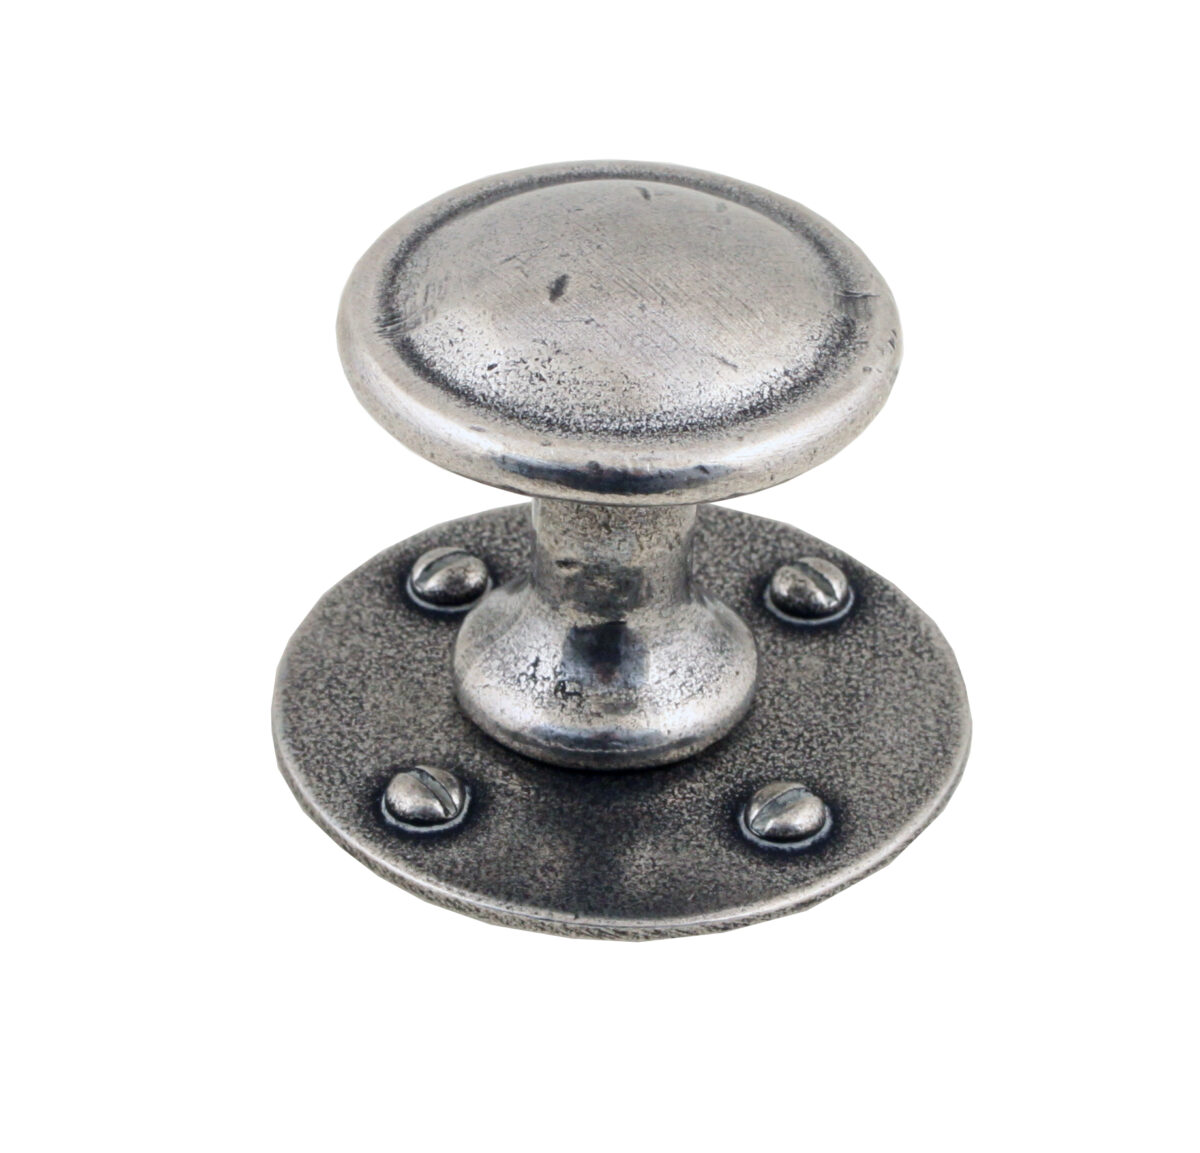 Chester cupboard knob with PBP006 backing plate